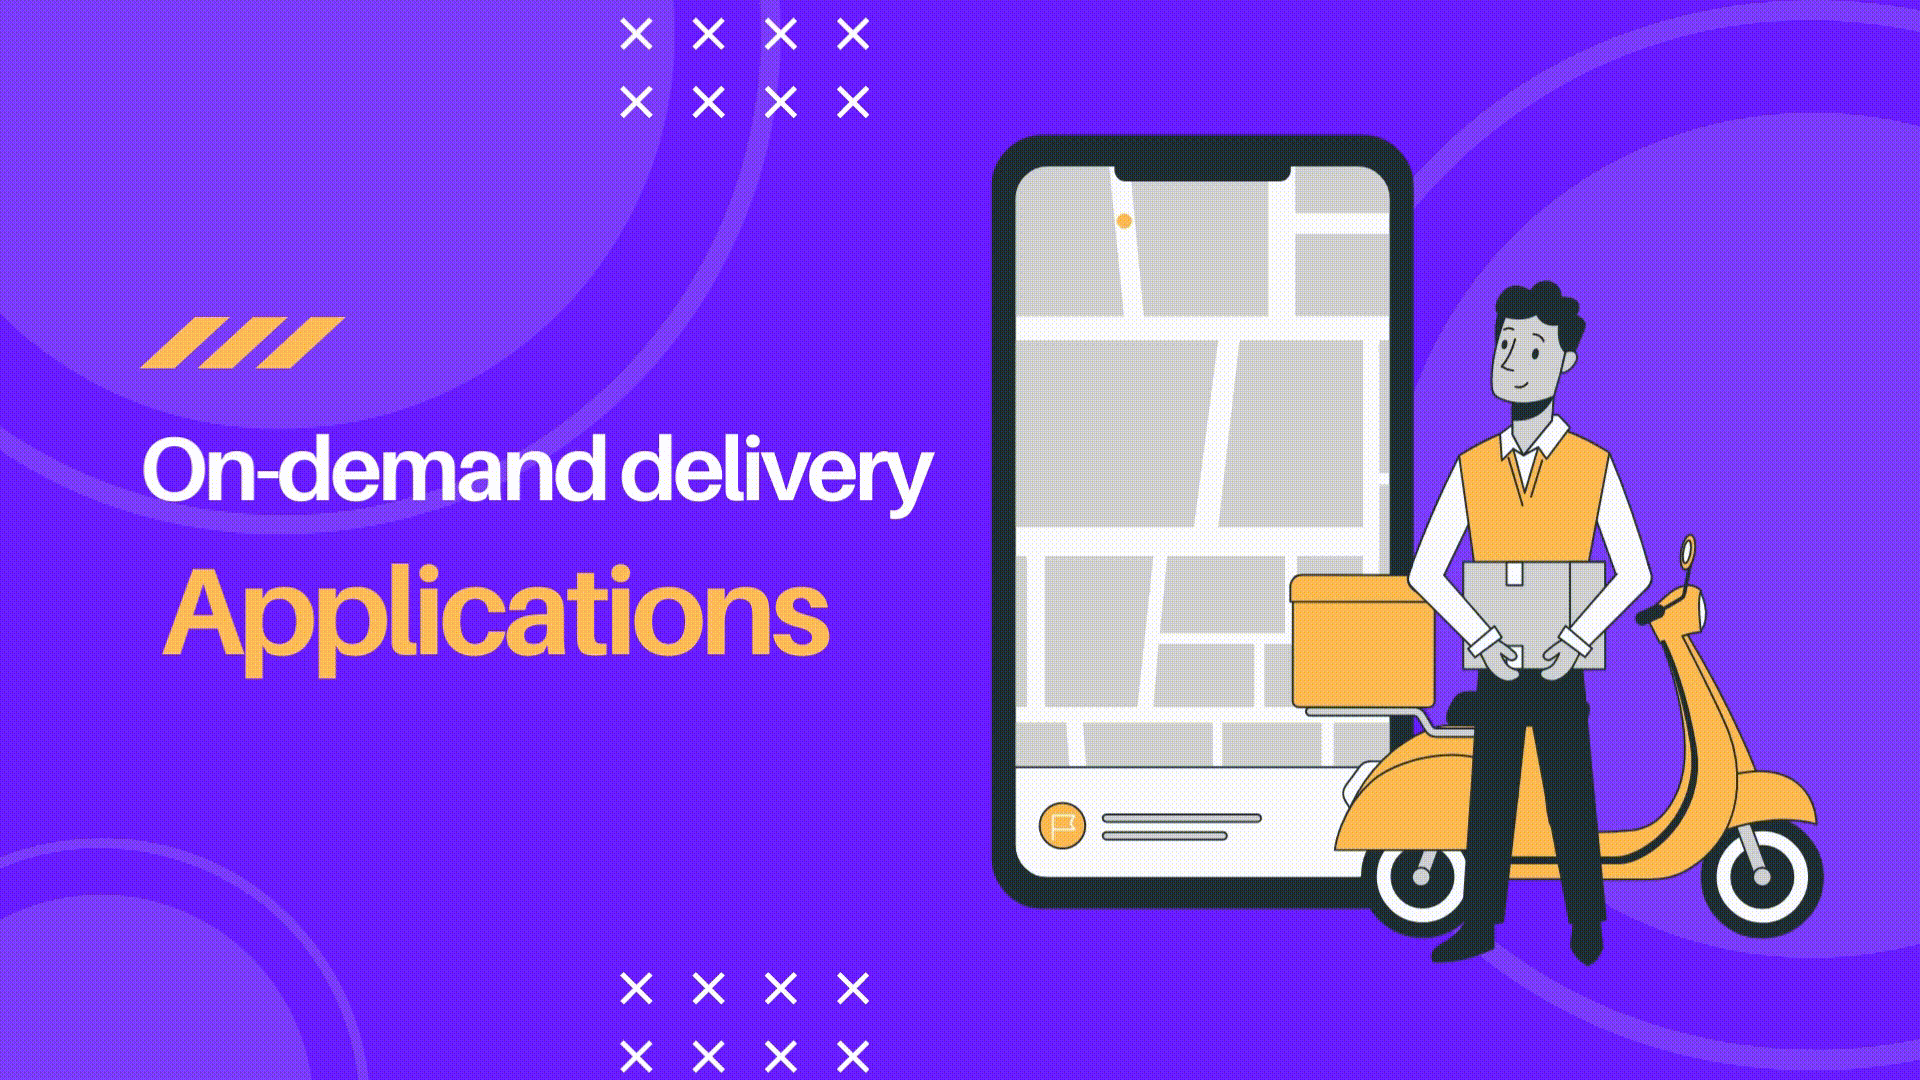 On Demand Delivery Application